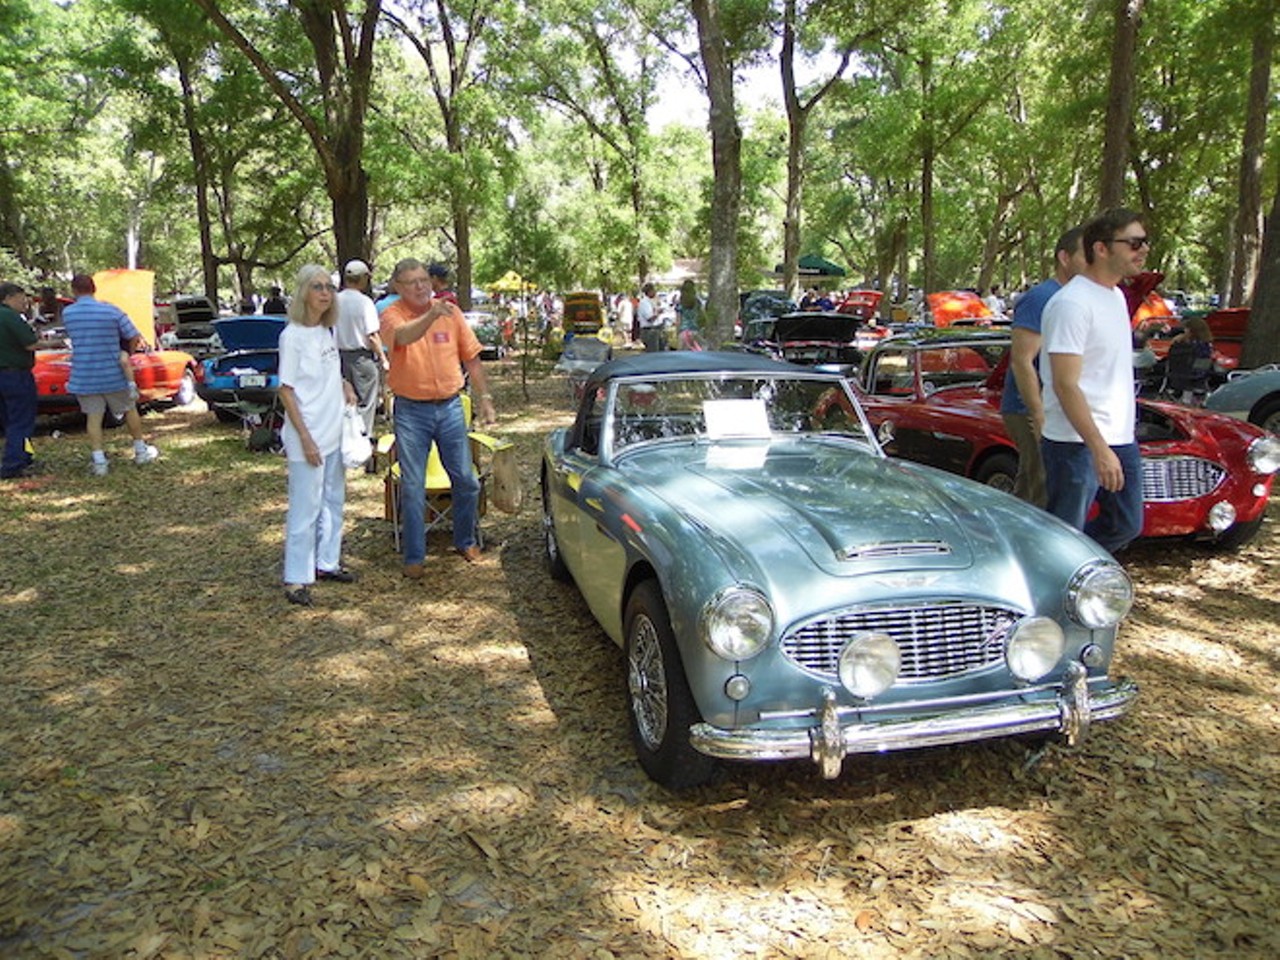 40 classic shots of the All-British Car Show at Mead Garden